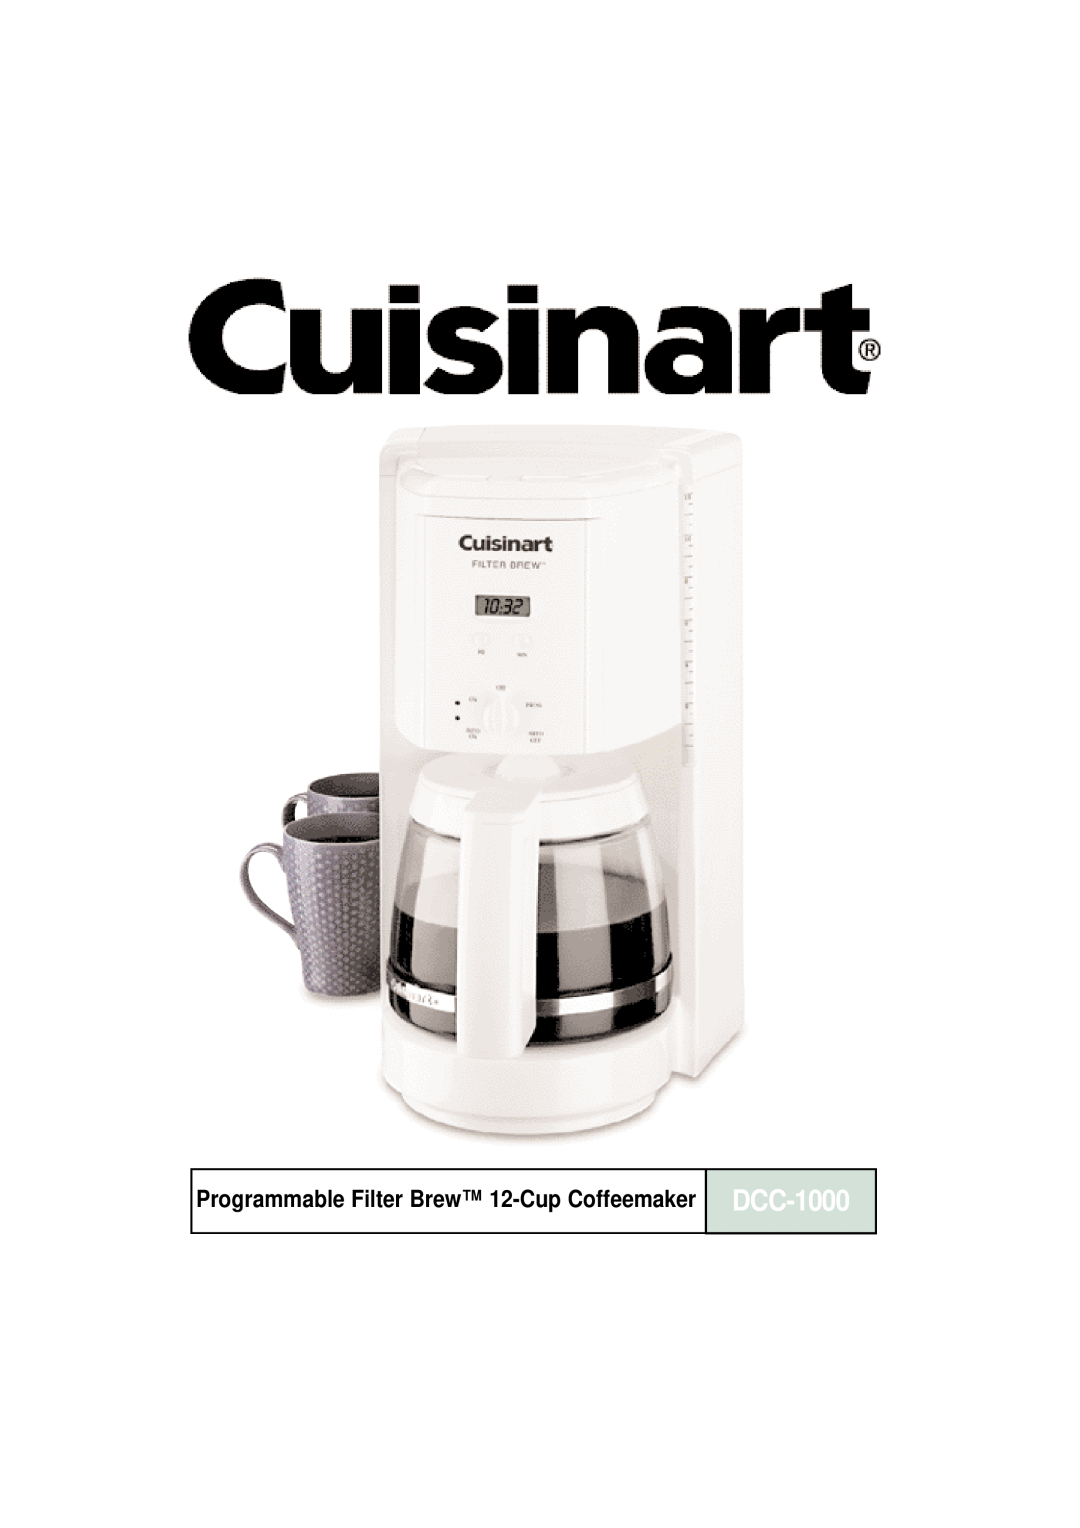 Cuisinart 73289 manual DCC-1000, Programmable Filter Brew 12-Cup Coffeemaker 